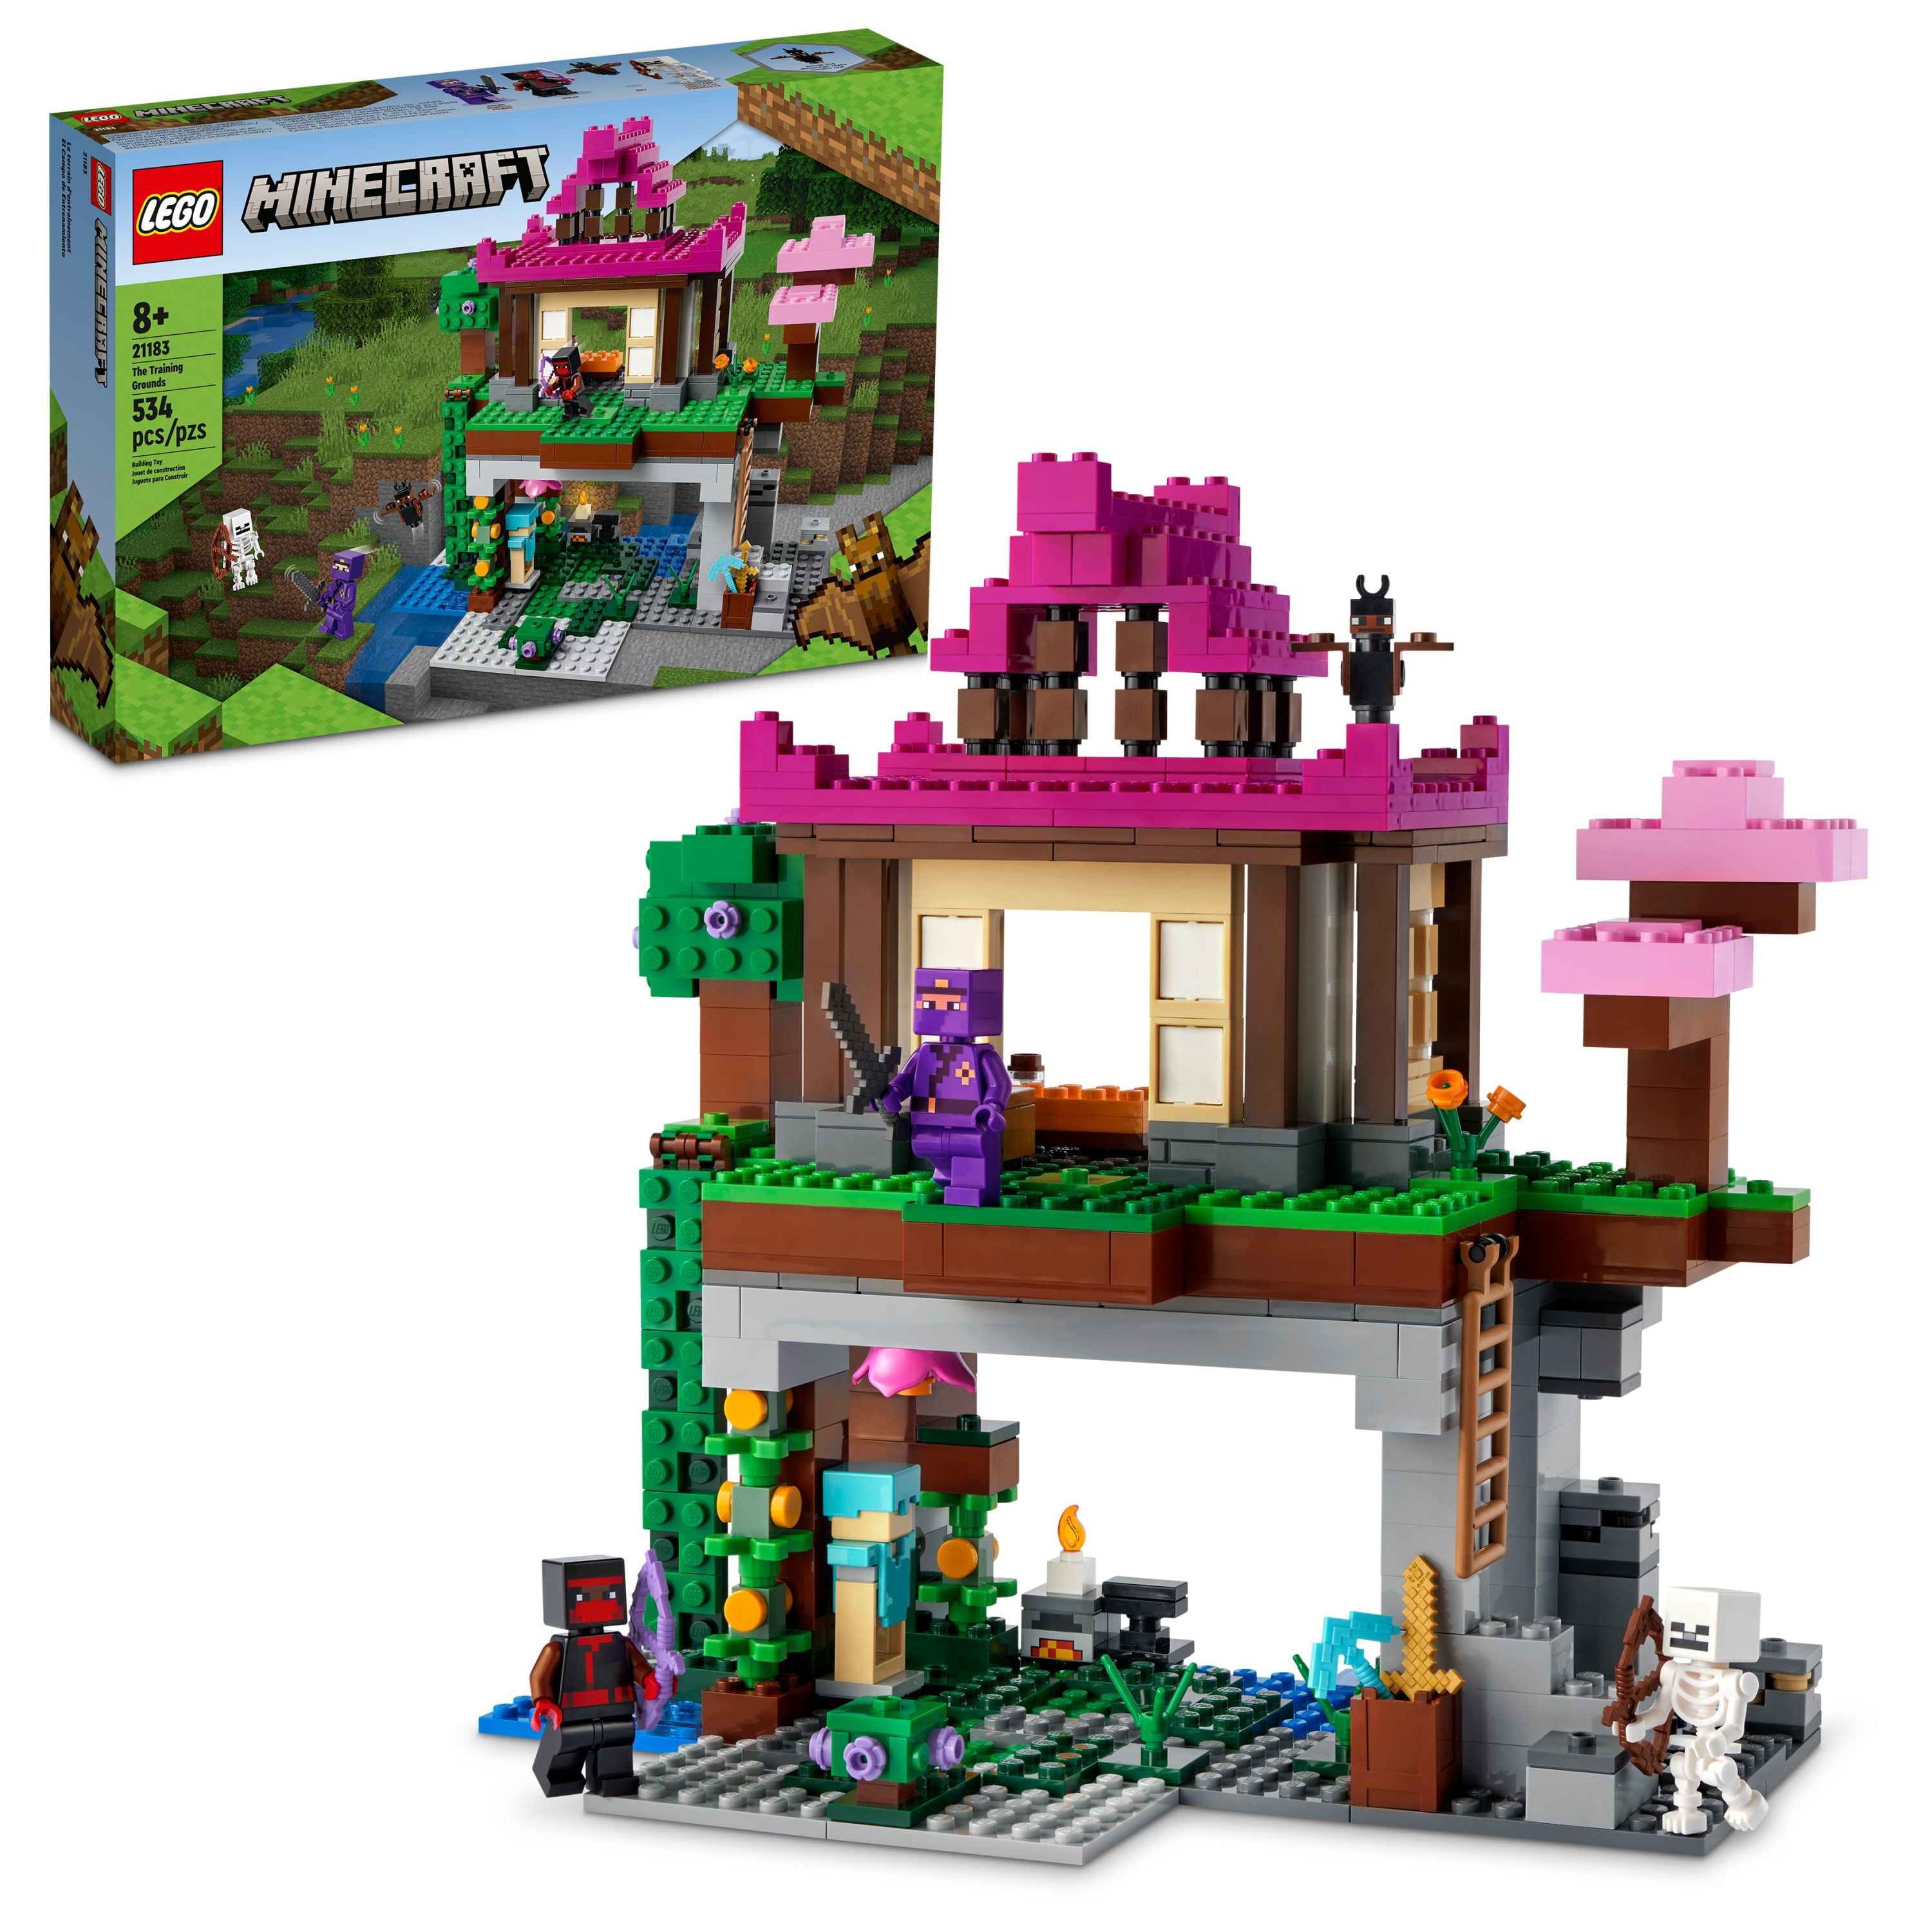 LEGO Minecraft The Training Grounds House Building Set, 21183 Cave Toy, for Kids, Boys and Girls with Skeleton, Ninja, Rogue and Bat Figures - Walmart.com